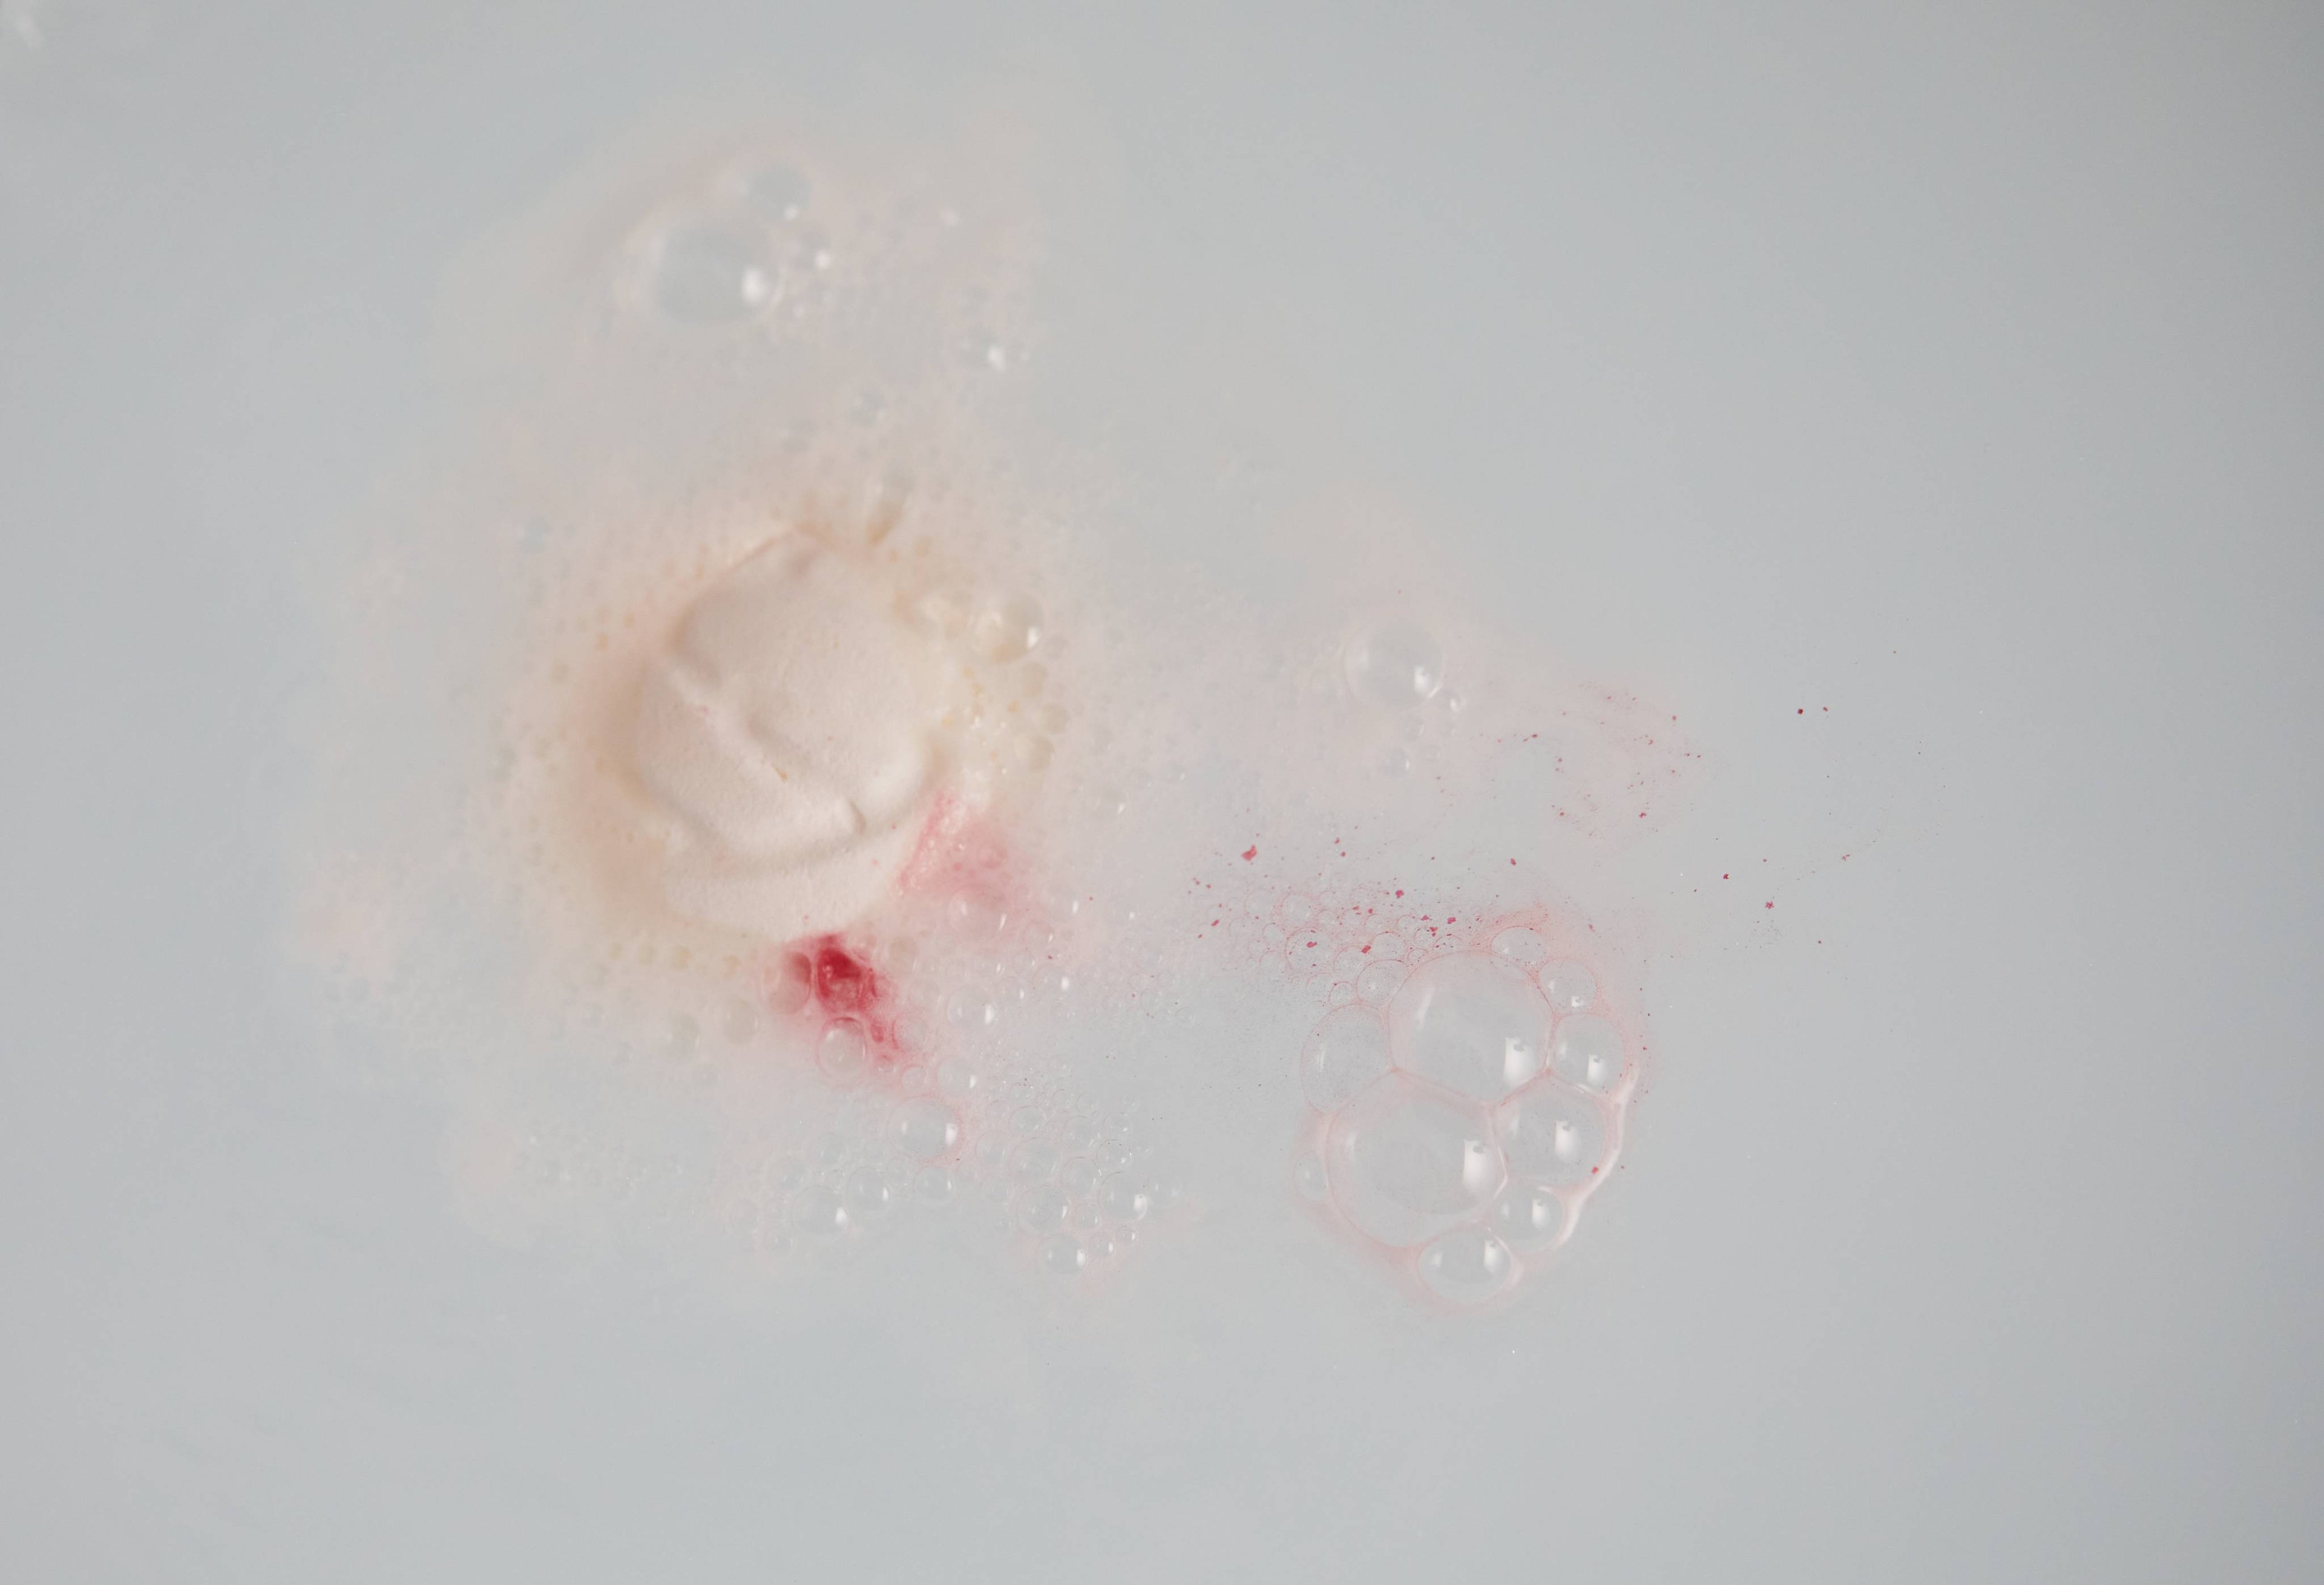 Bath bomb slowly dissolves in the bathwater creating subtle, creamy swirls of velvety water as the red starts to seep out.